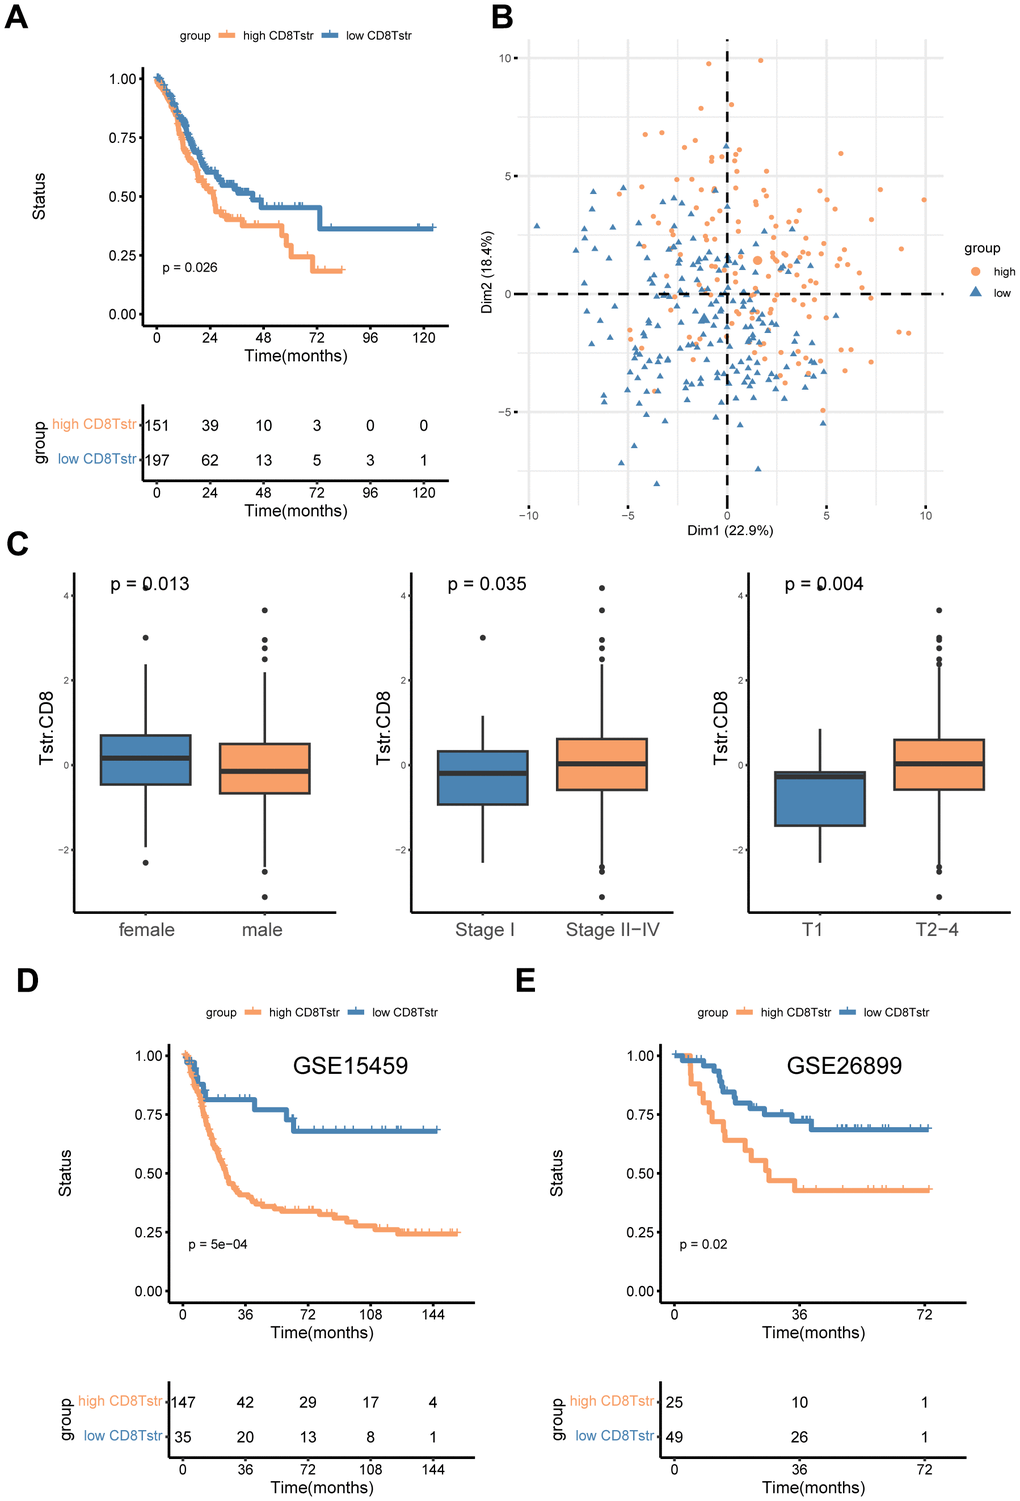 High/low CD8+ TSTR groups classification. (A) Kaplan-Meier survival curves for OS in the training cohort TCGA-GC. (B) PCA for the high/low CD8+ TSTR groups. (C) Infiltration of CD8+ TSTR cells according to gender (female/male), stage (I/II -IV) and T stage (1/2-4). (D) Kaplan-Meier survival curves for OS in the GC dataset GSE15459. (E) Kaplan-Meier survival curves for OS in the GC dataset GSE26899.